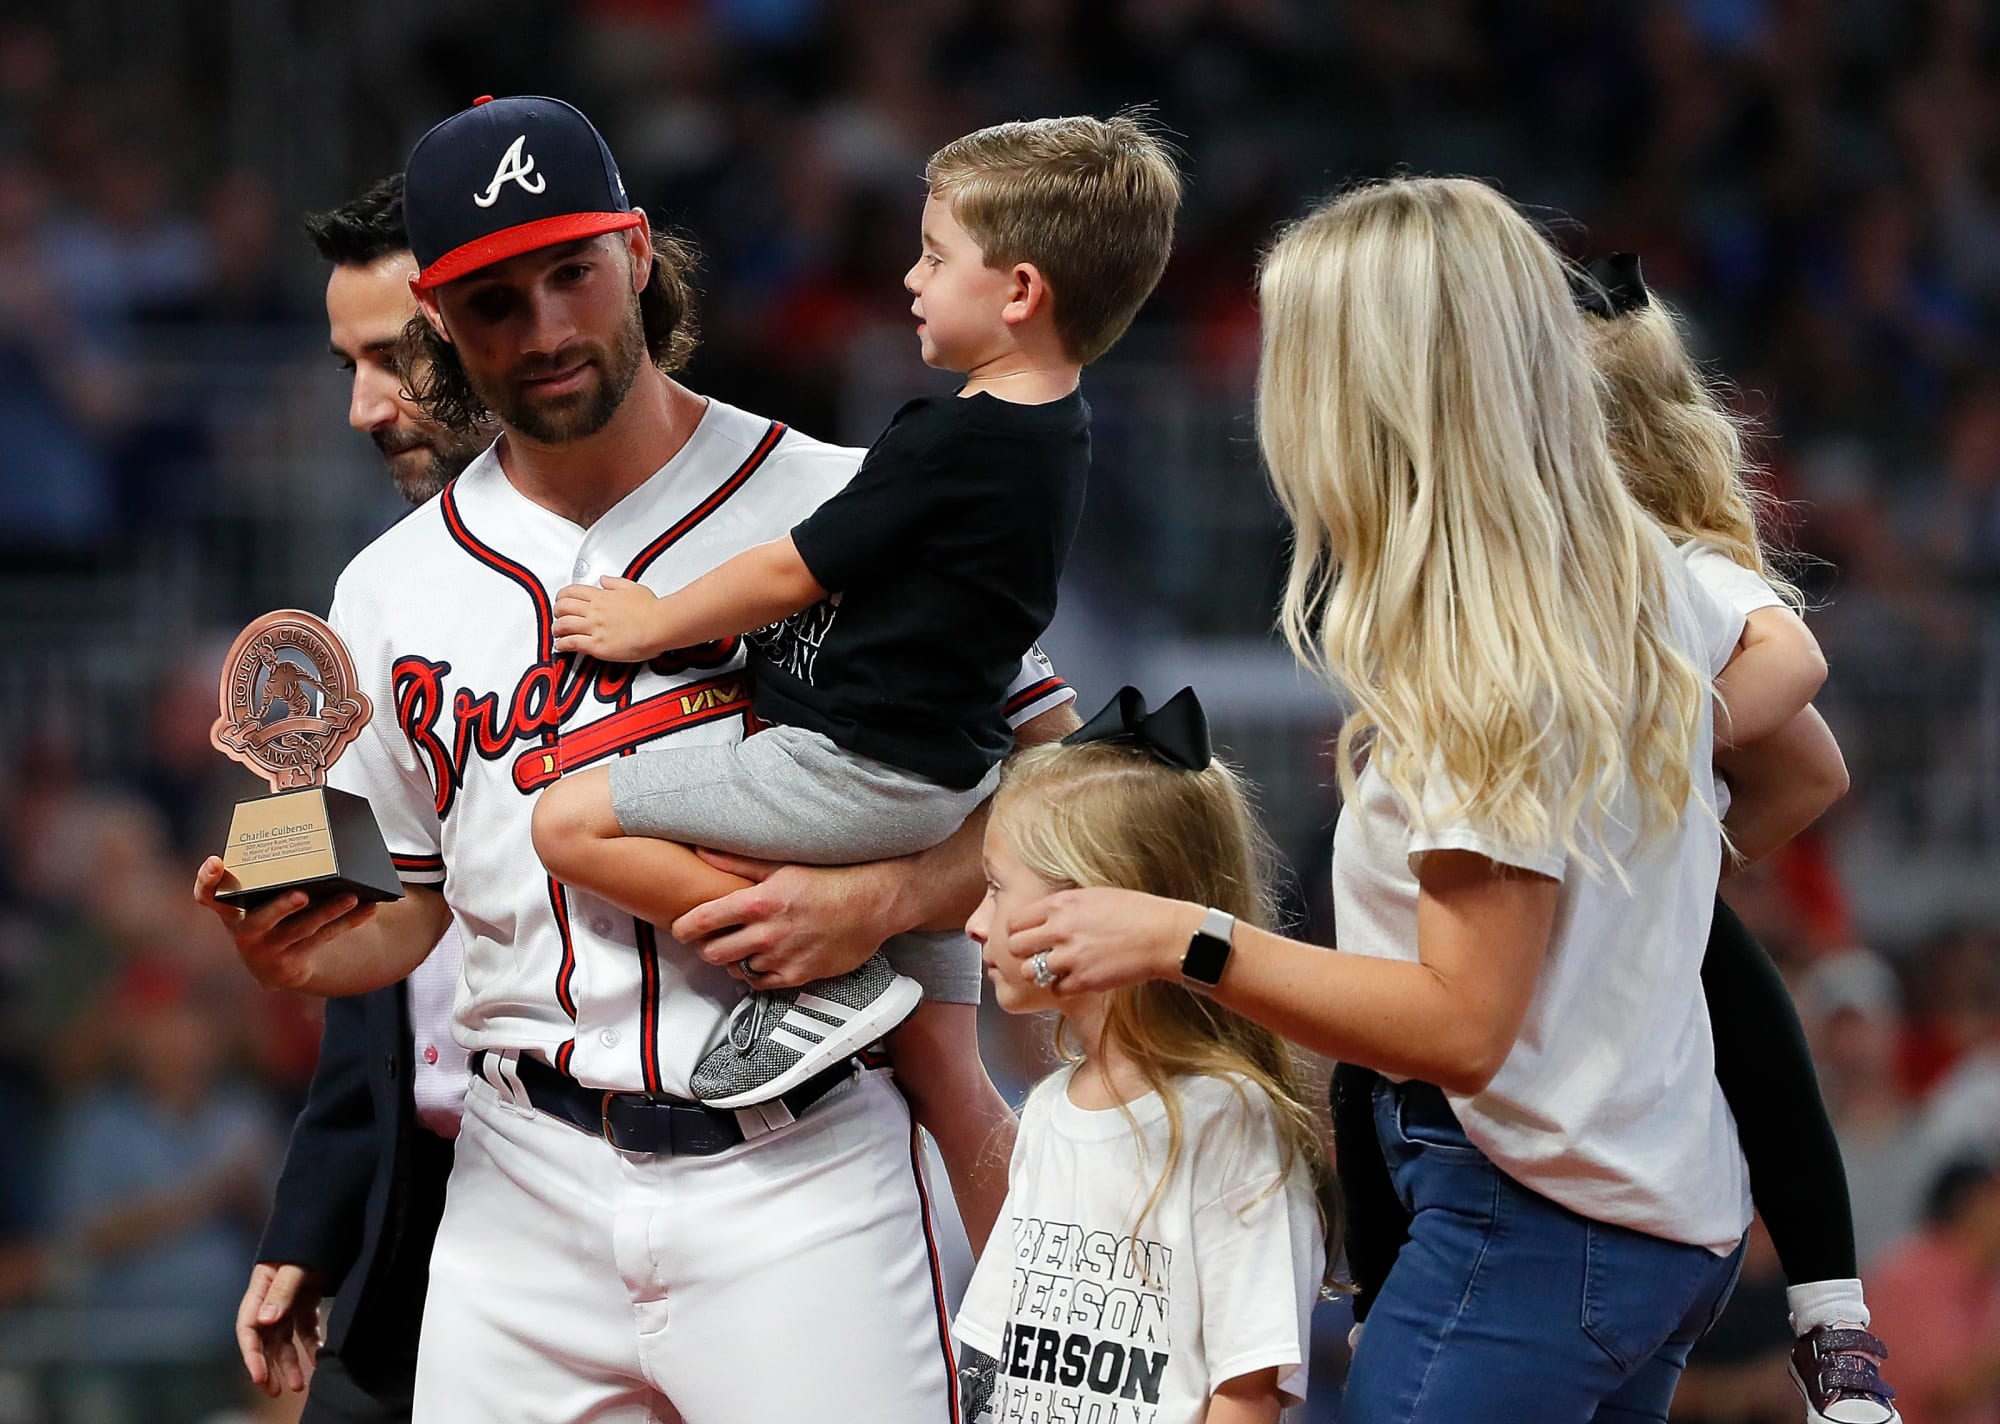 Celebrating the Career of Charlie Culberson with His Jersey